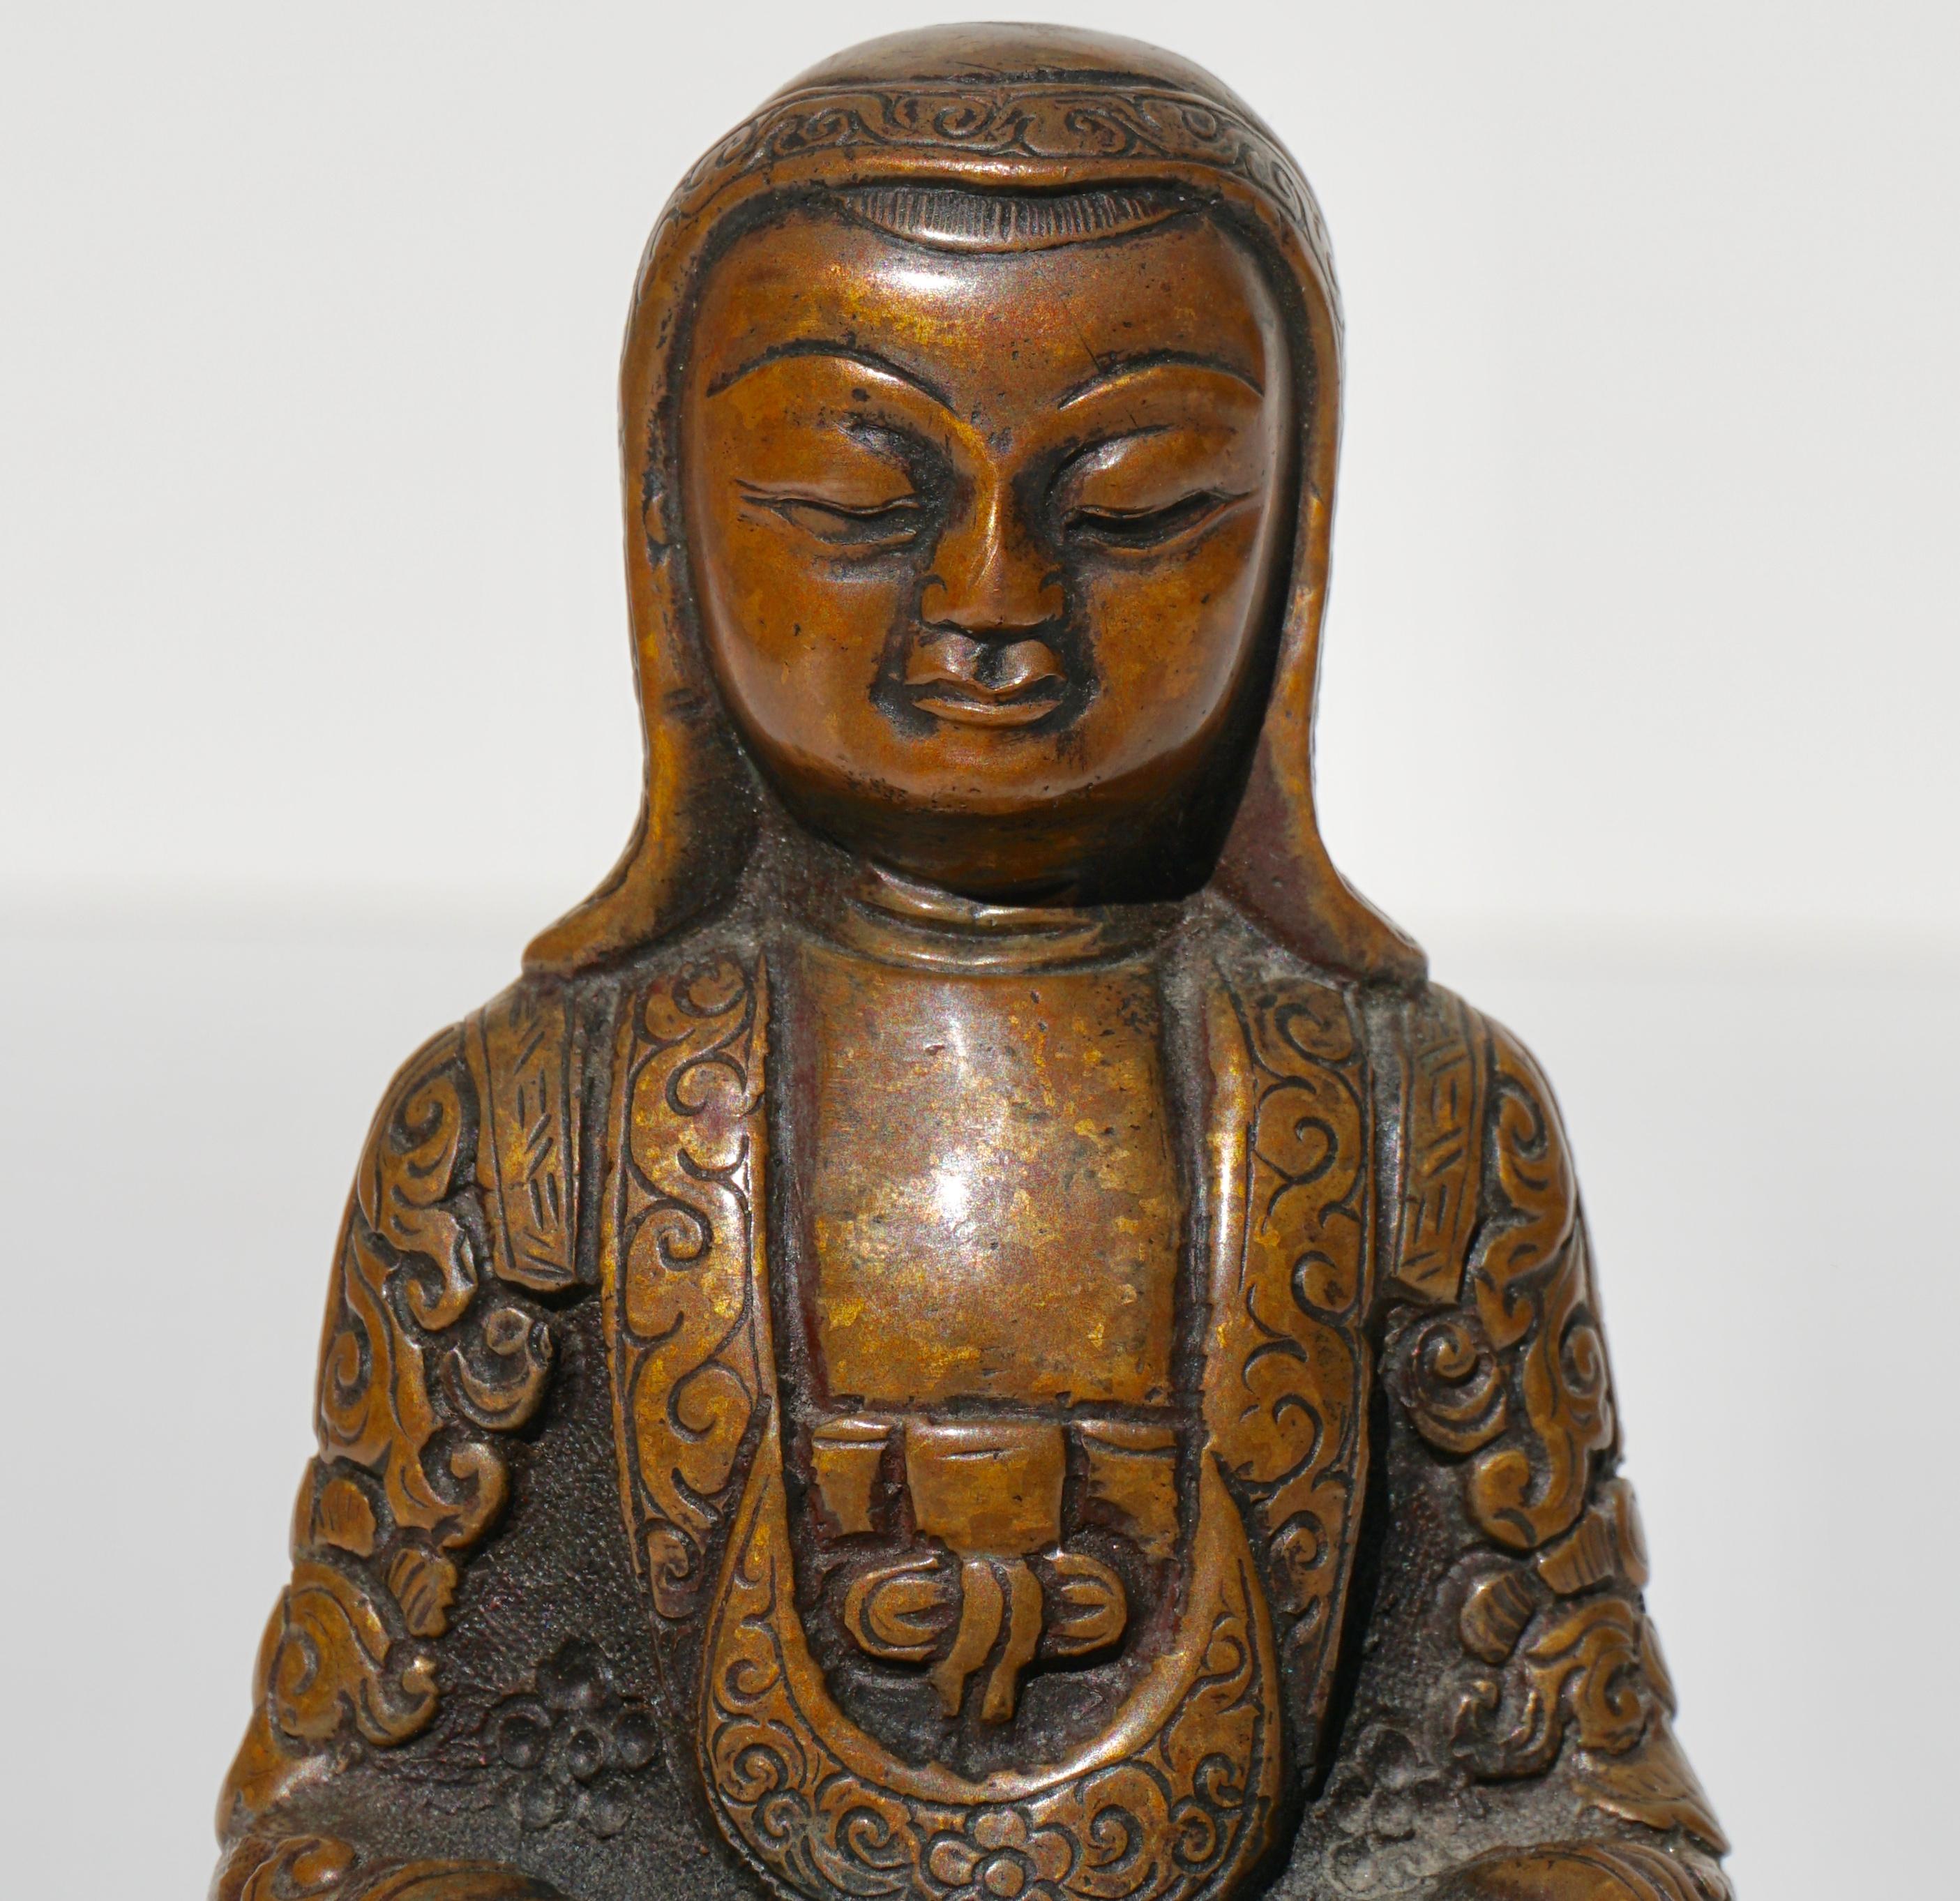 A peaceful Monk or Lama seated in a Buddhist crossed legged posture on a lotus throne (Padmasana) with both hands in a meditation gesture of Dhyana Mudra. His patched garments and bonnet are incised in a skilful manner typical of the Tsang atelier.